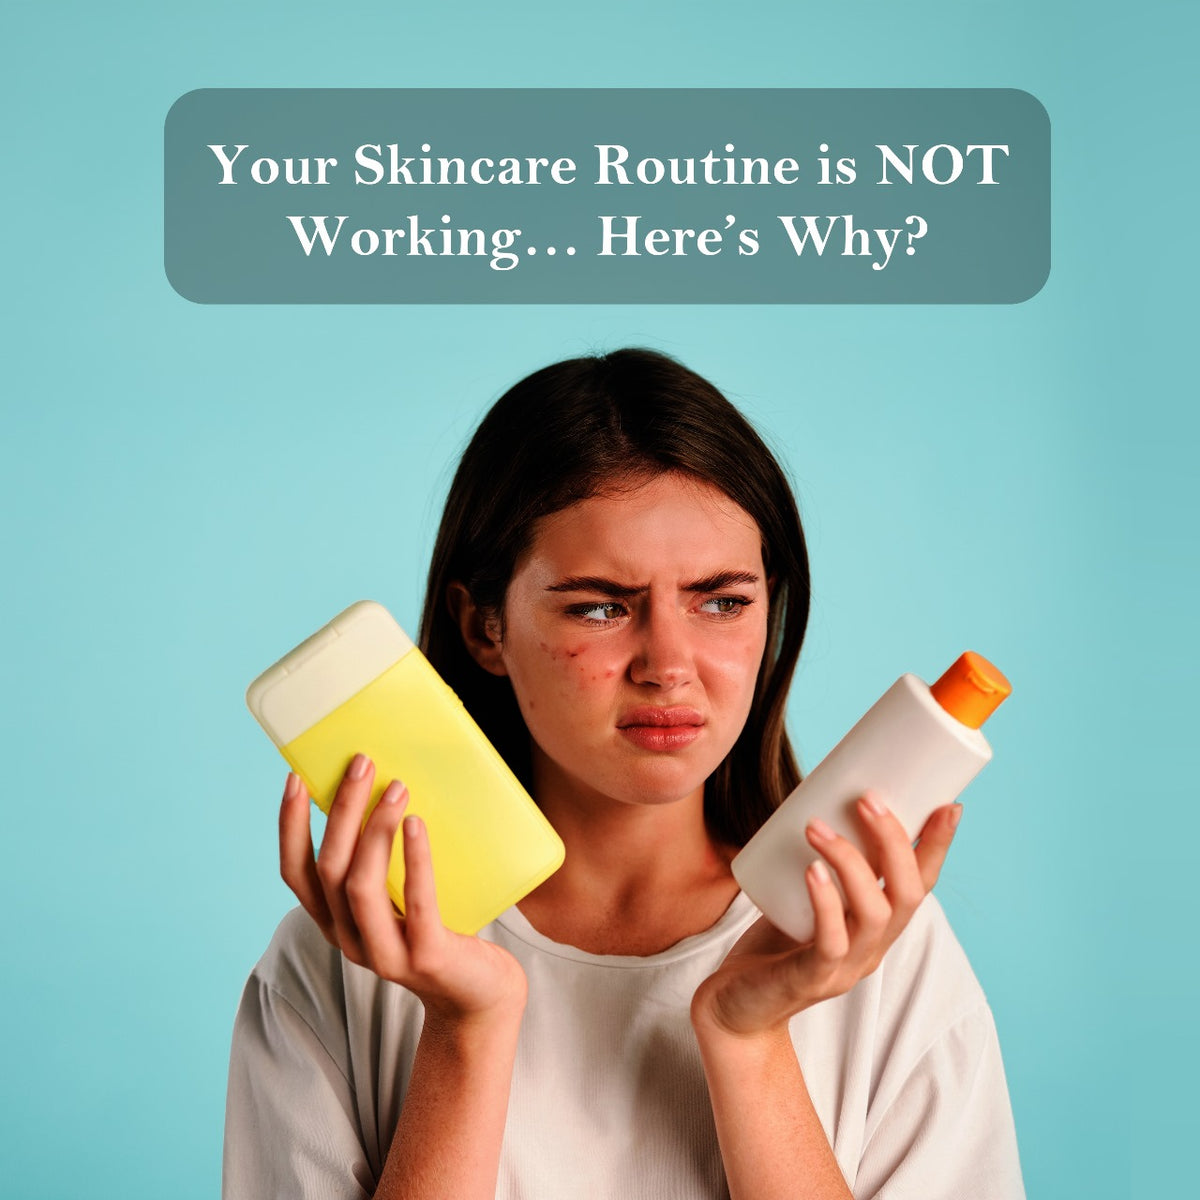 Your Skincare Routine is NOT Working… Here’s Why?